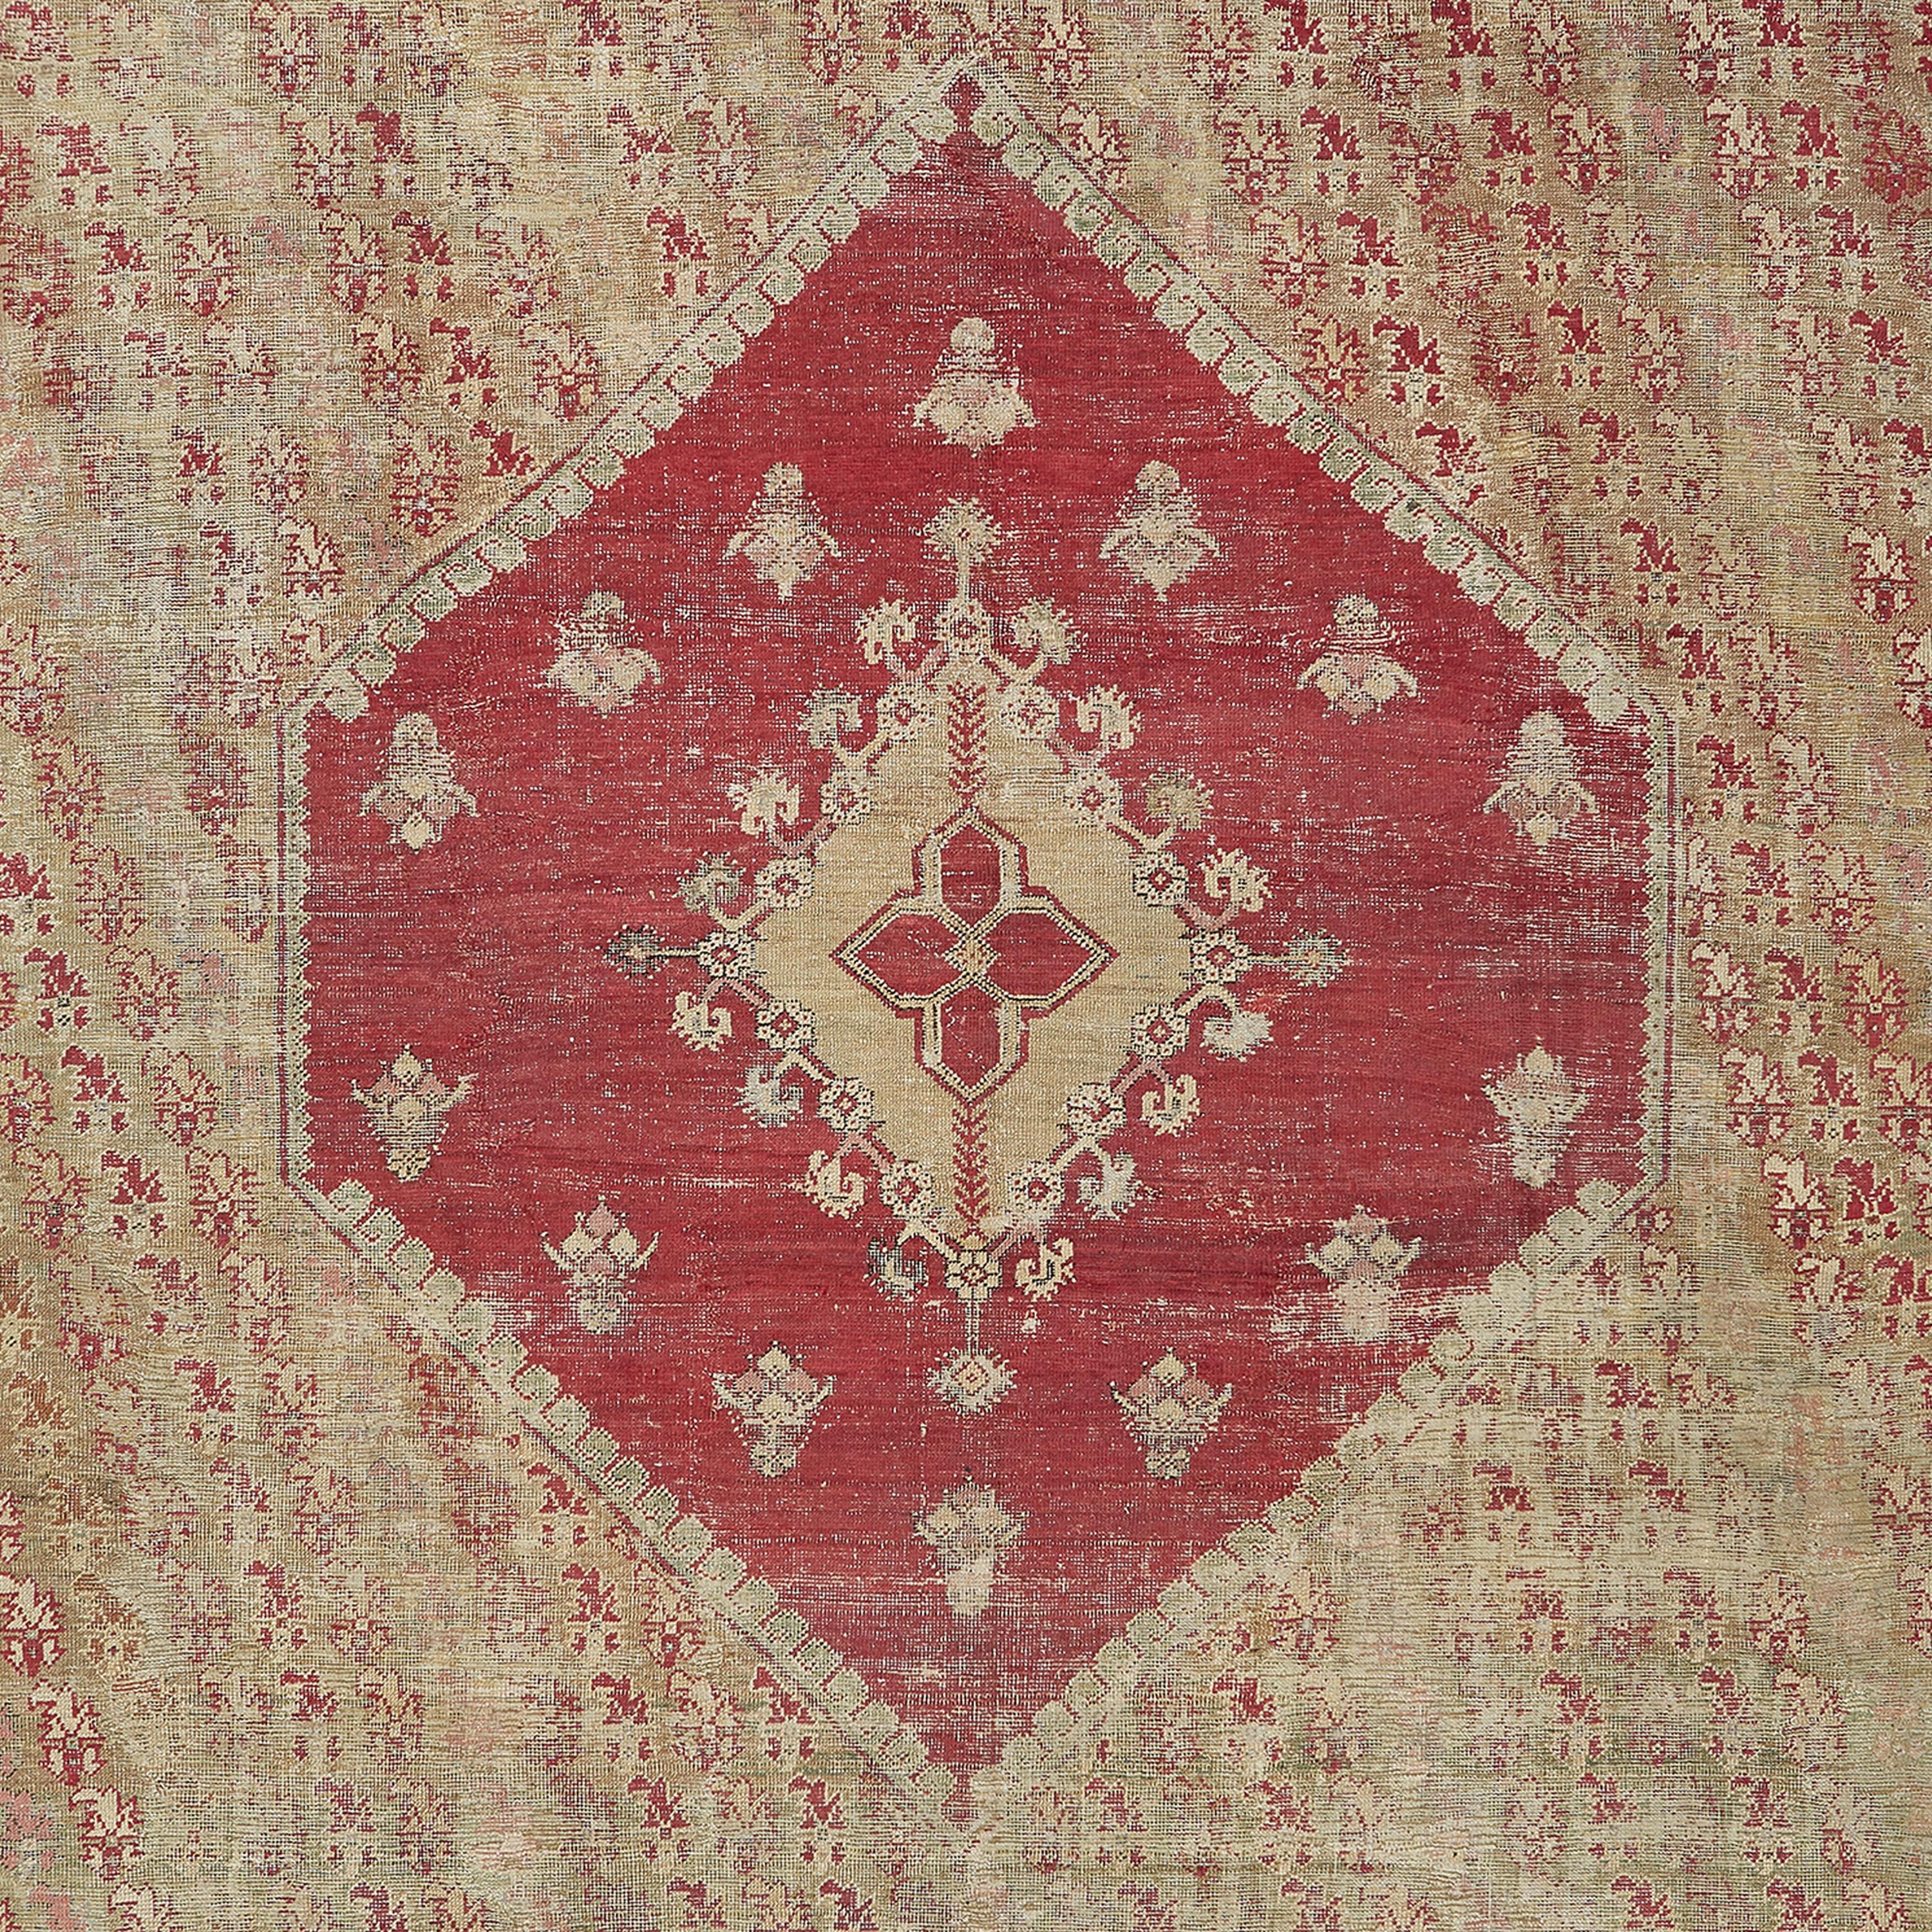 This handwoven wool rug displays a simple crimson medallion that interrupts a profusion of boteh motifs spanning across the soft beige ground. The broken charcoal outlines bring subtle clarity to the overall composition. A late 19th century classic